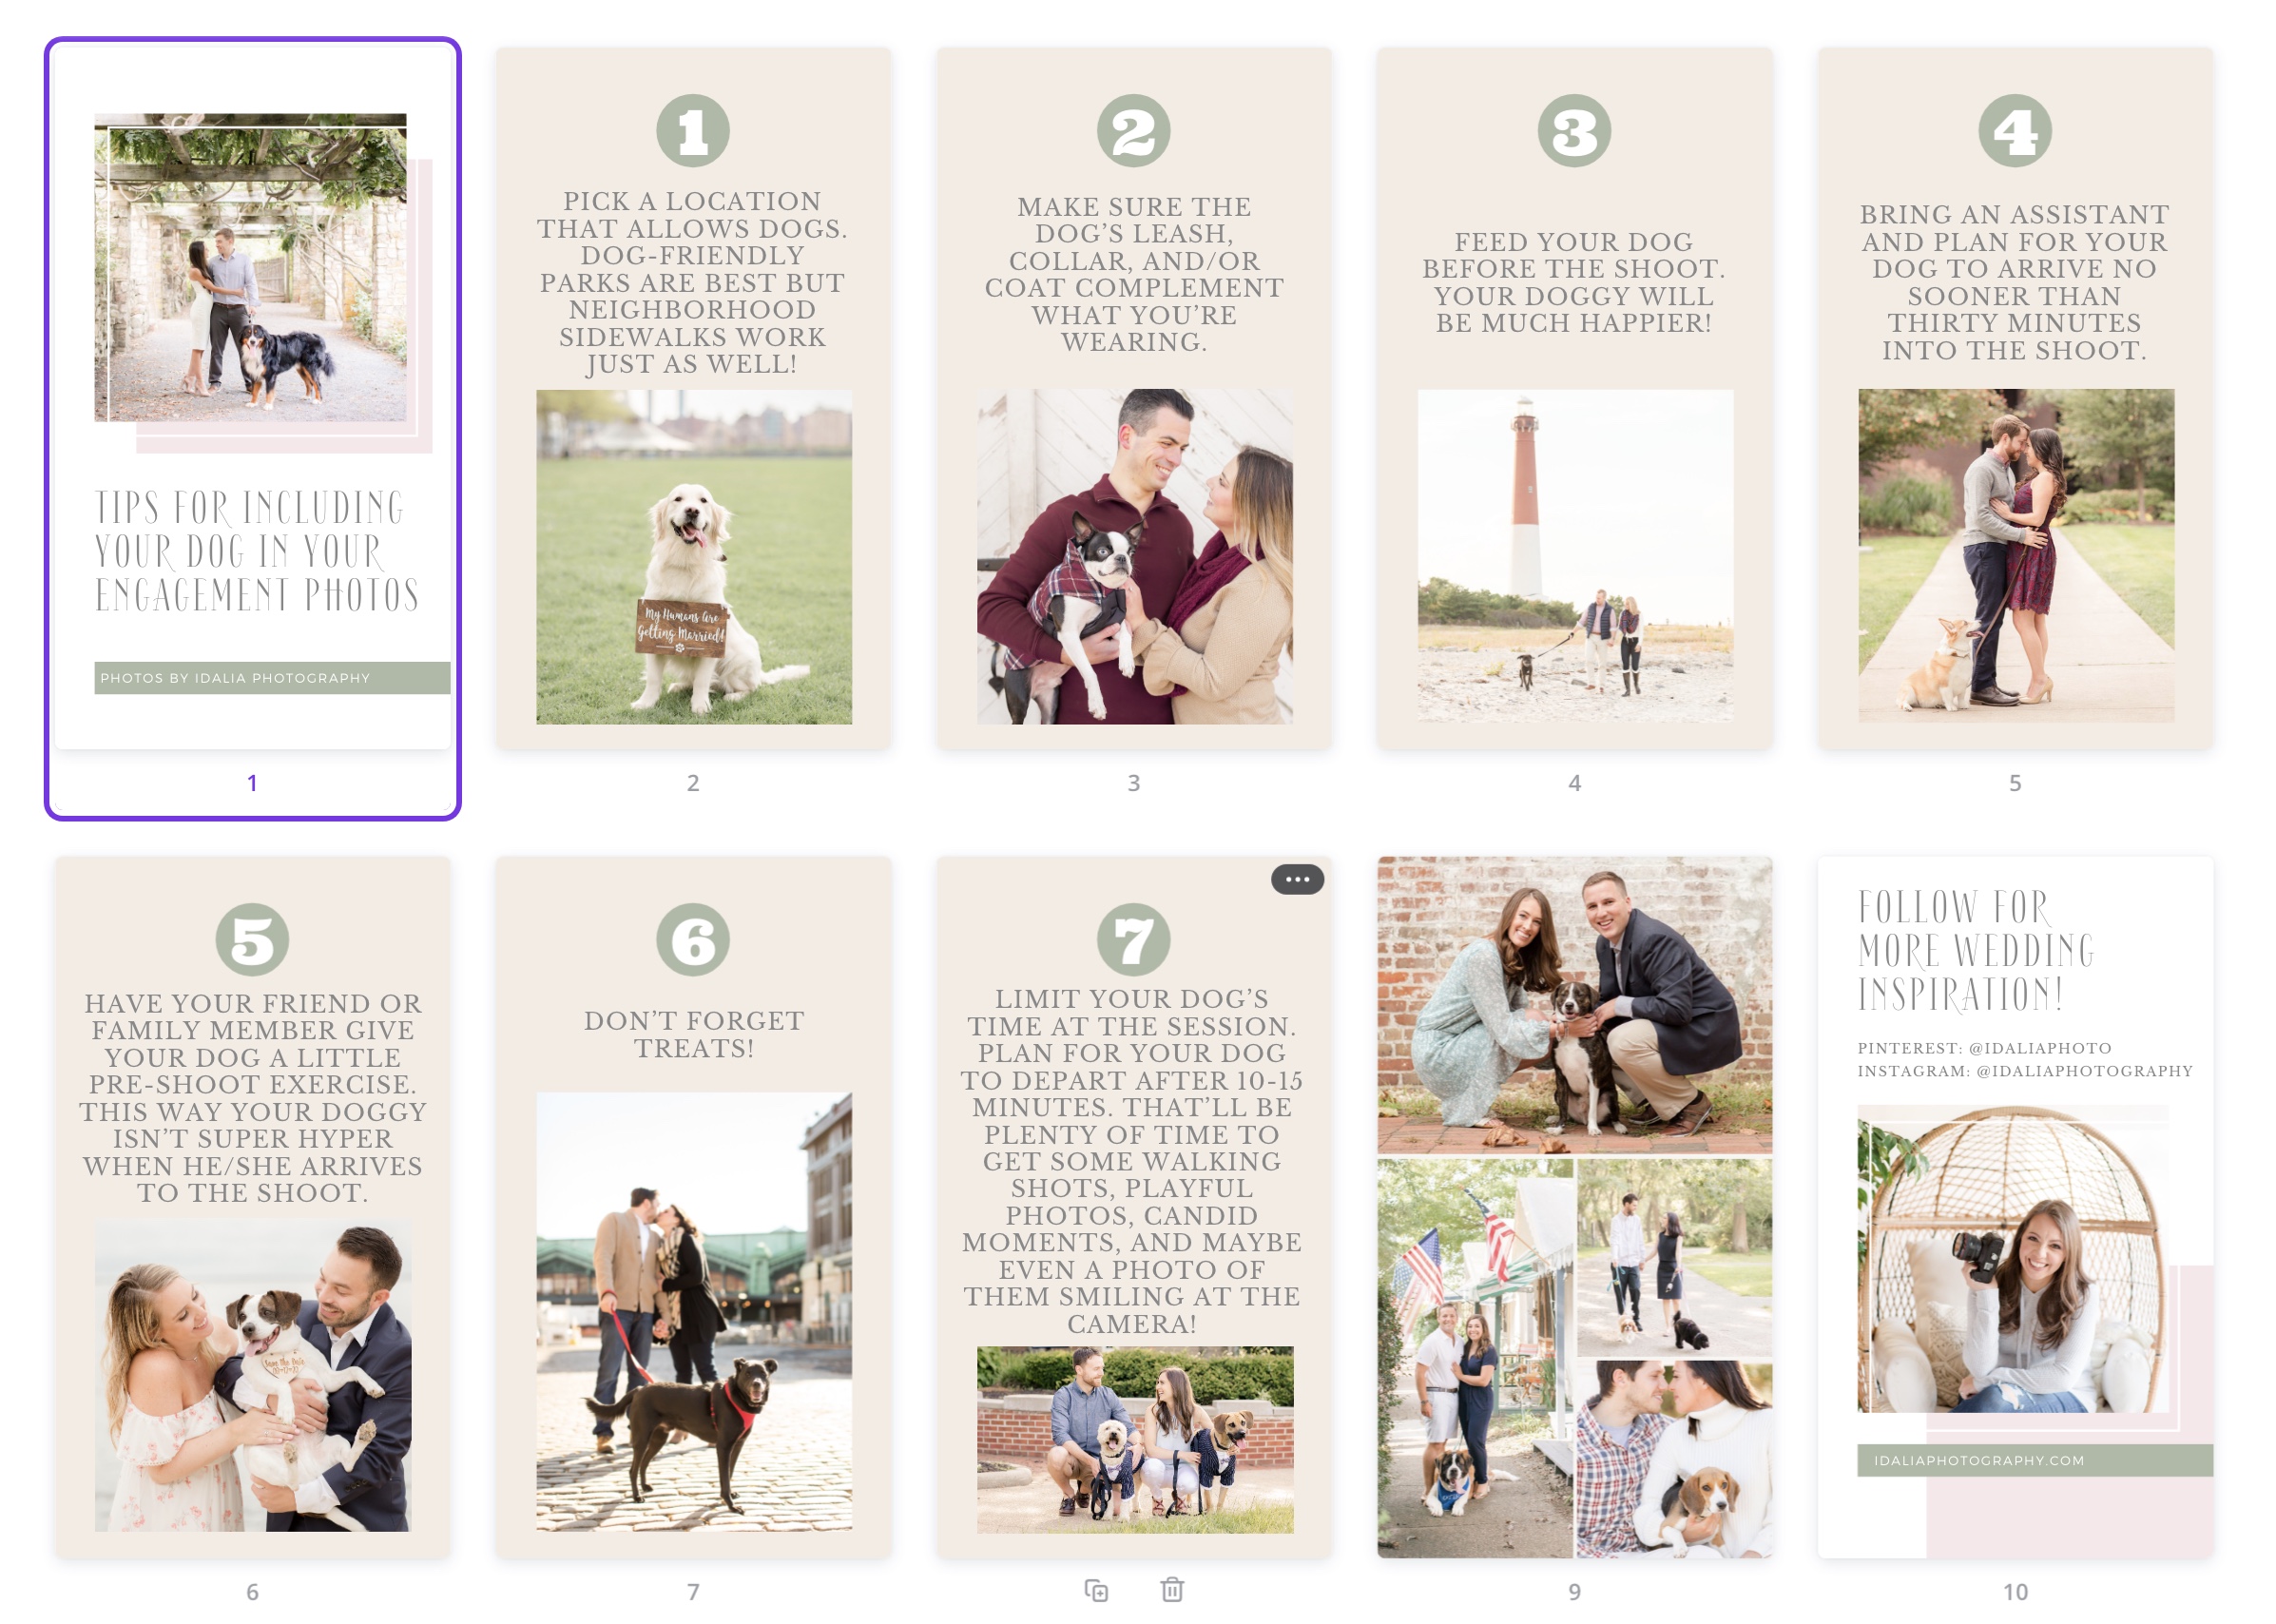 Tips for Including Dog in Engagement Session